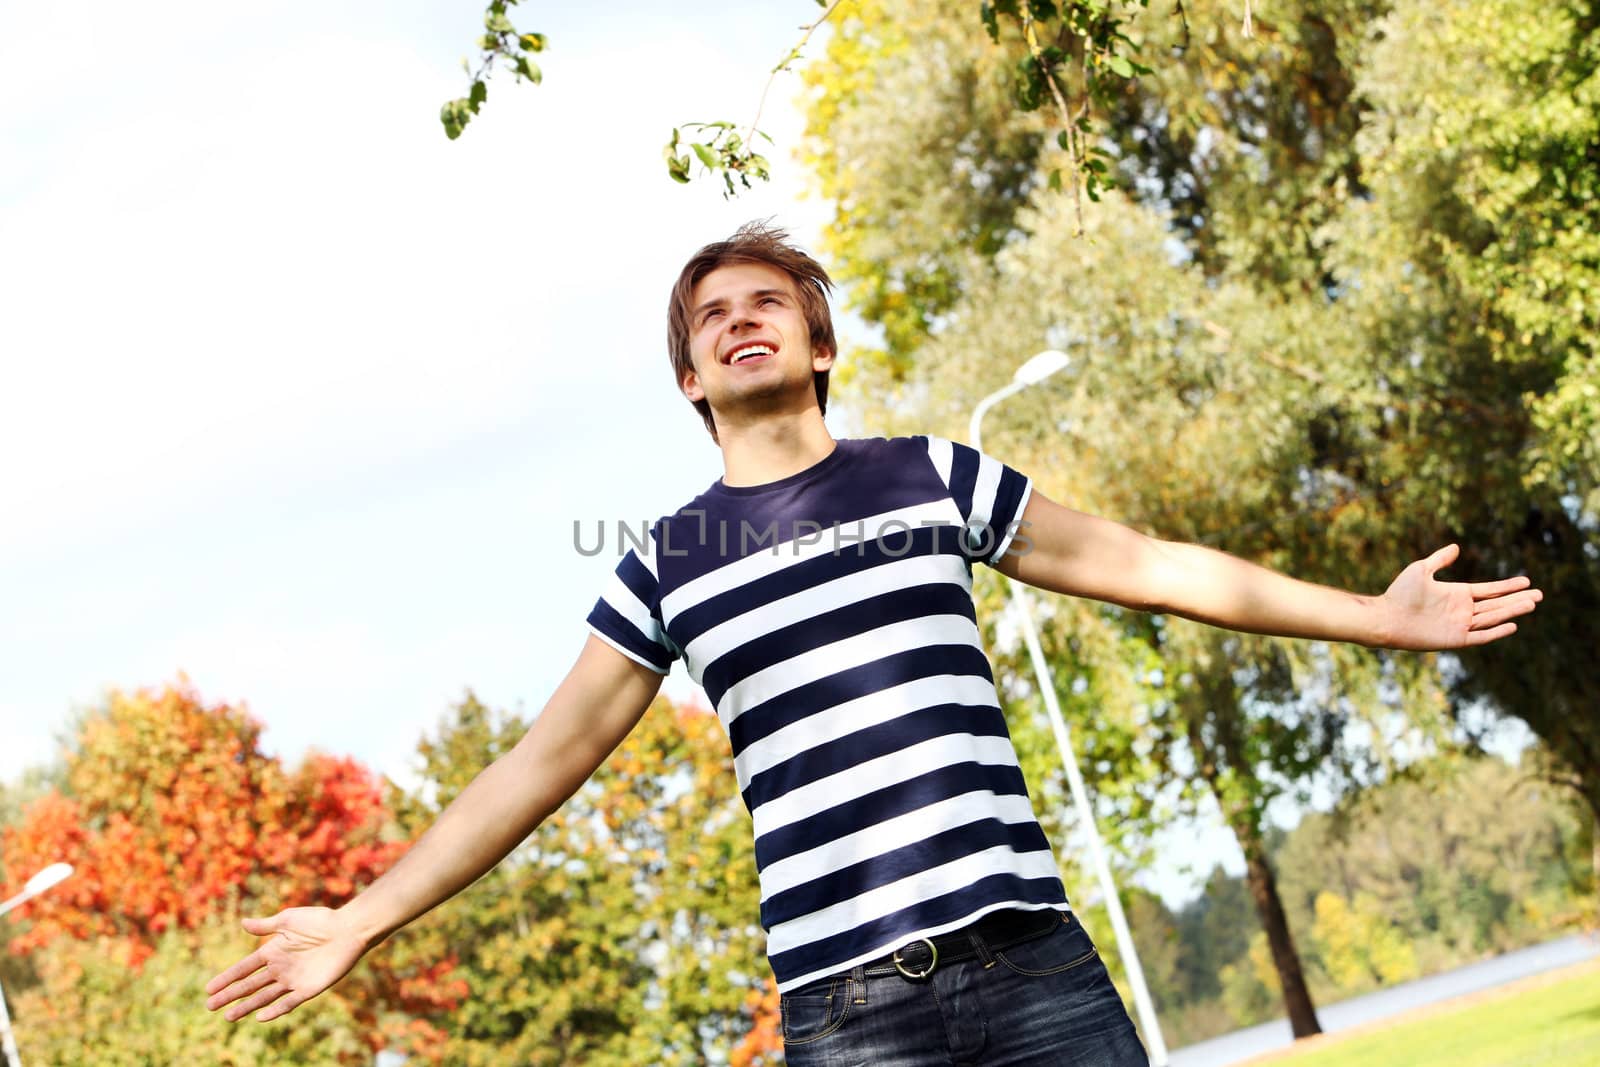 Portrait of happy and attractive young man at warm day in autumn park